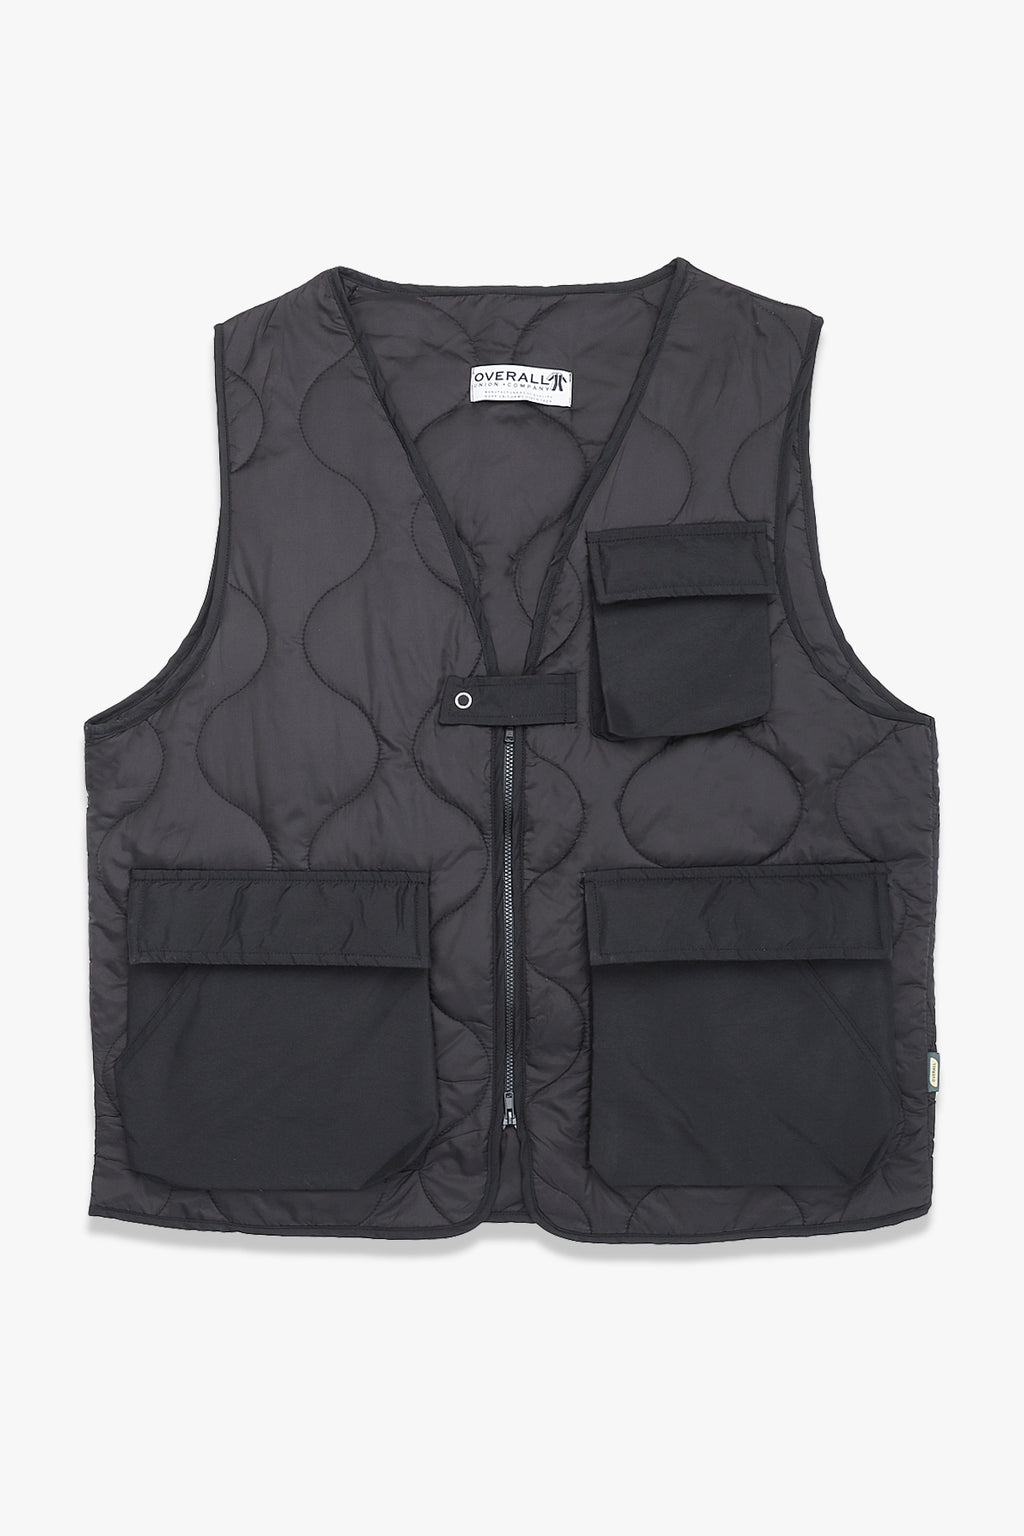 Overall Union - Quilted Light Liner Jacket - Black